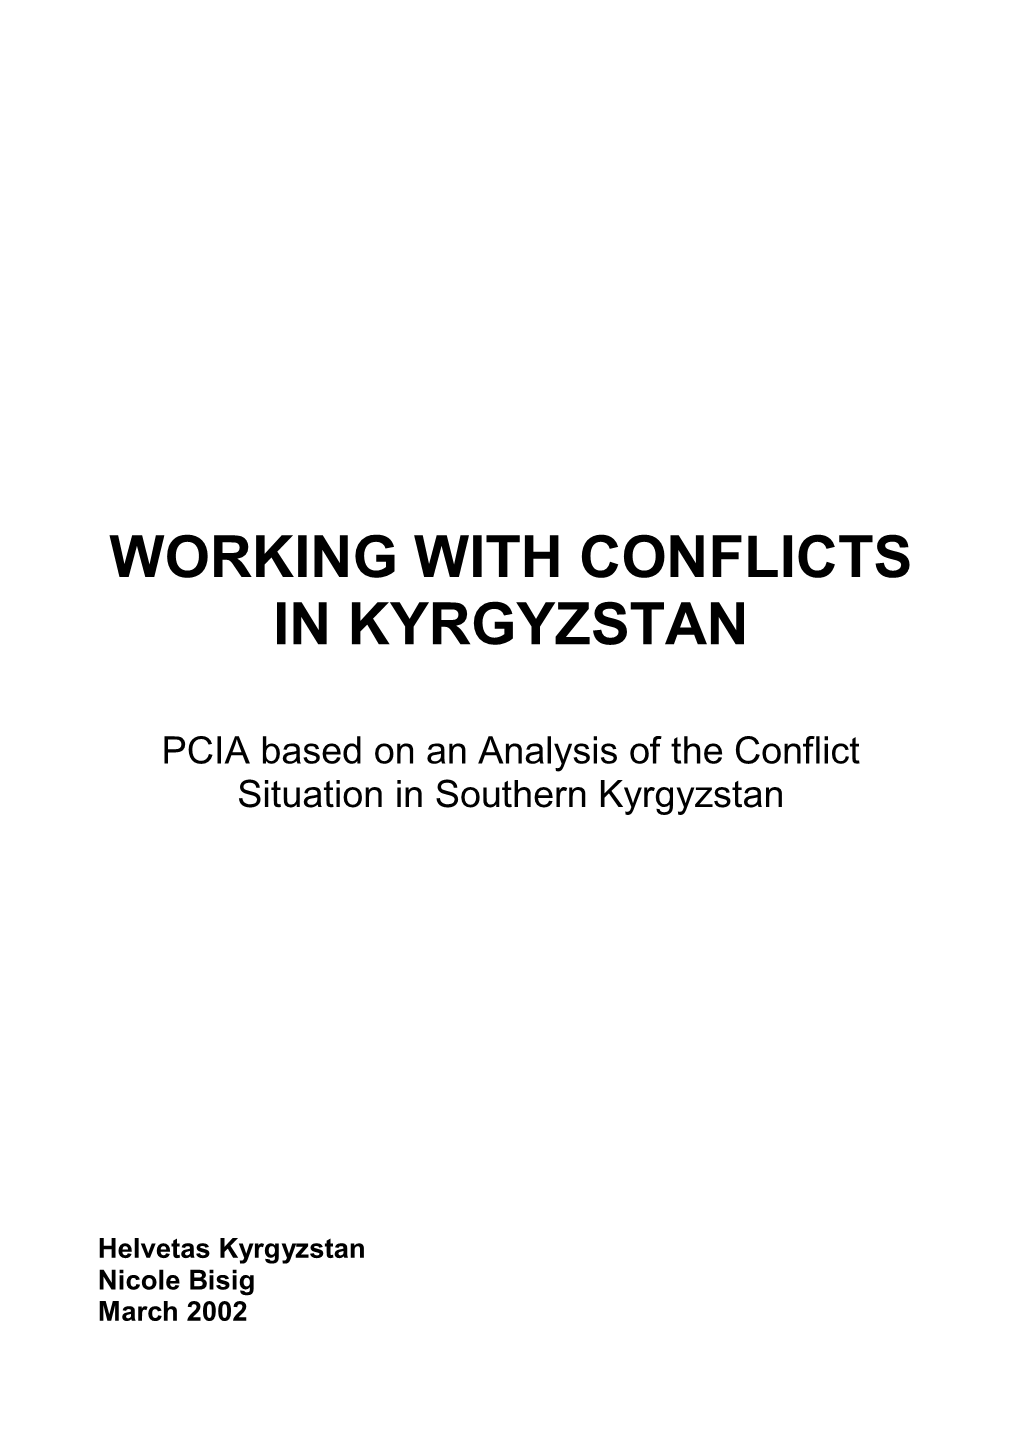 Working with Conflicts in Kyrgyzstan